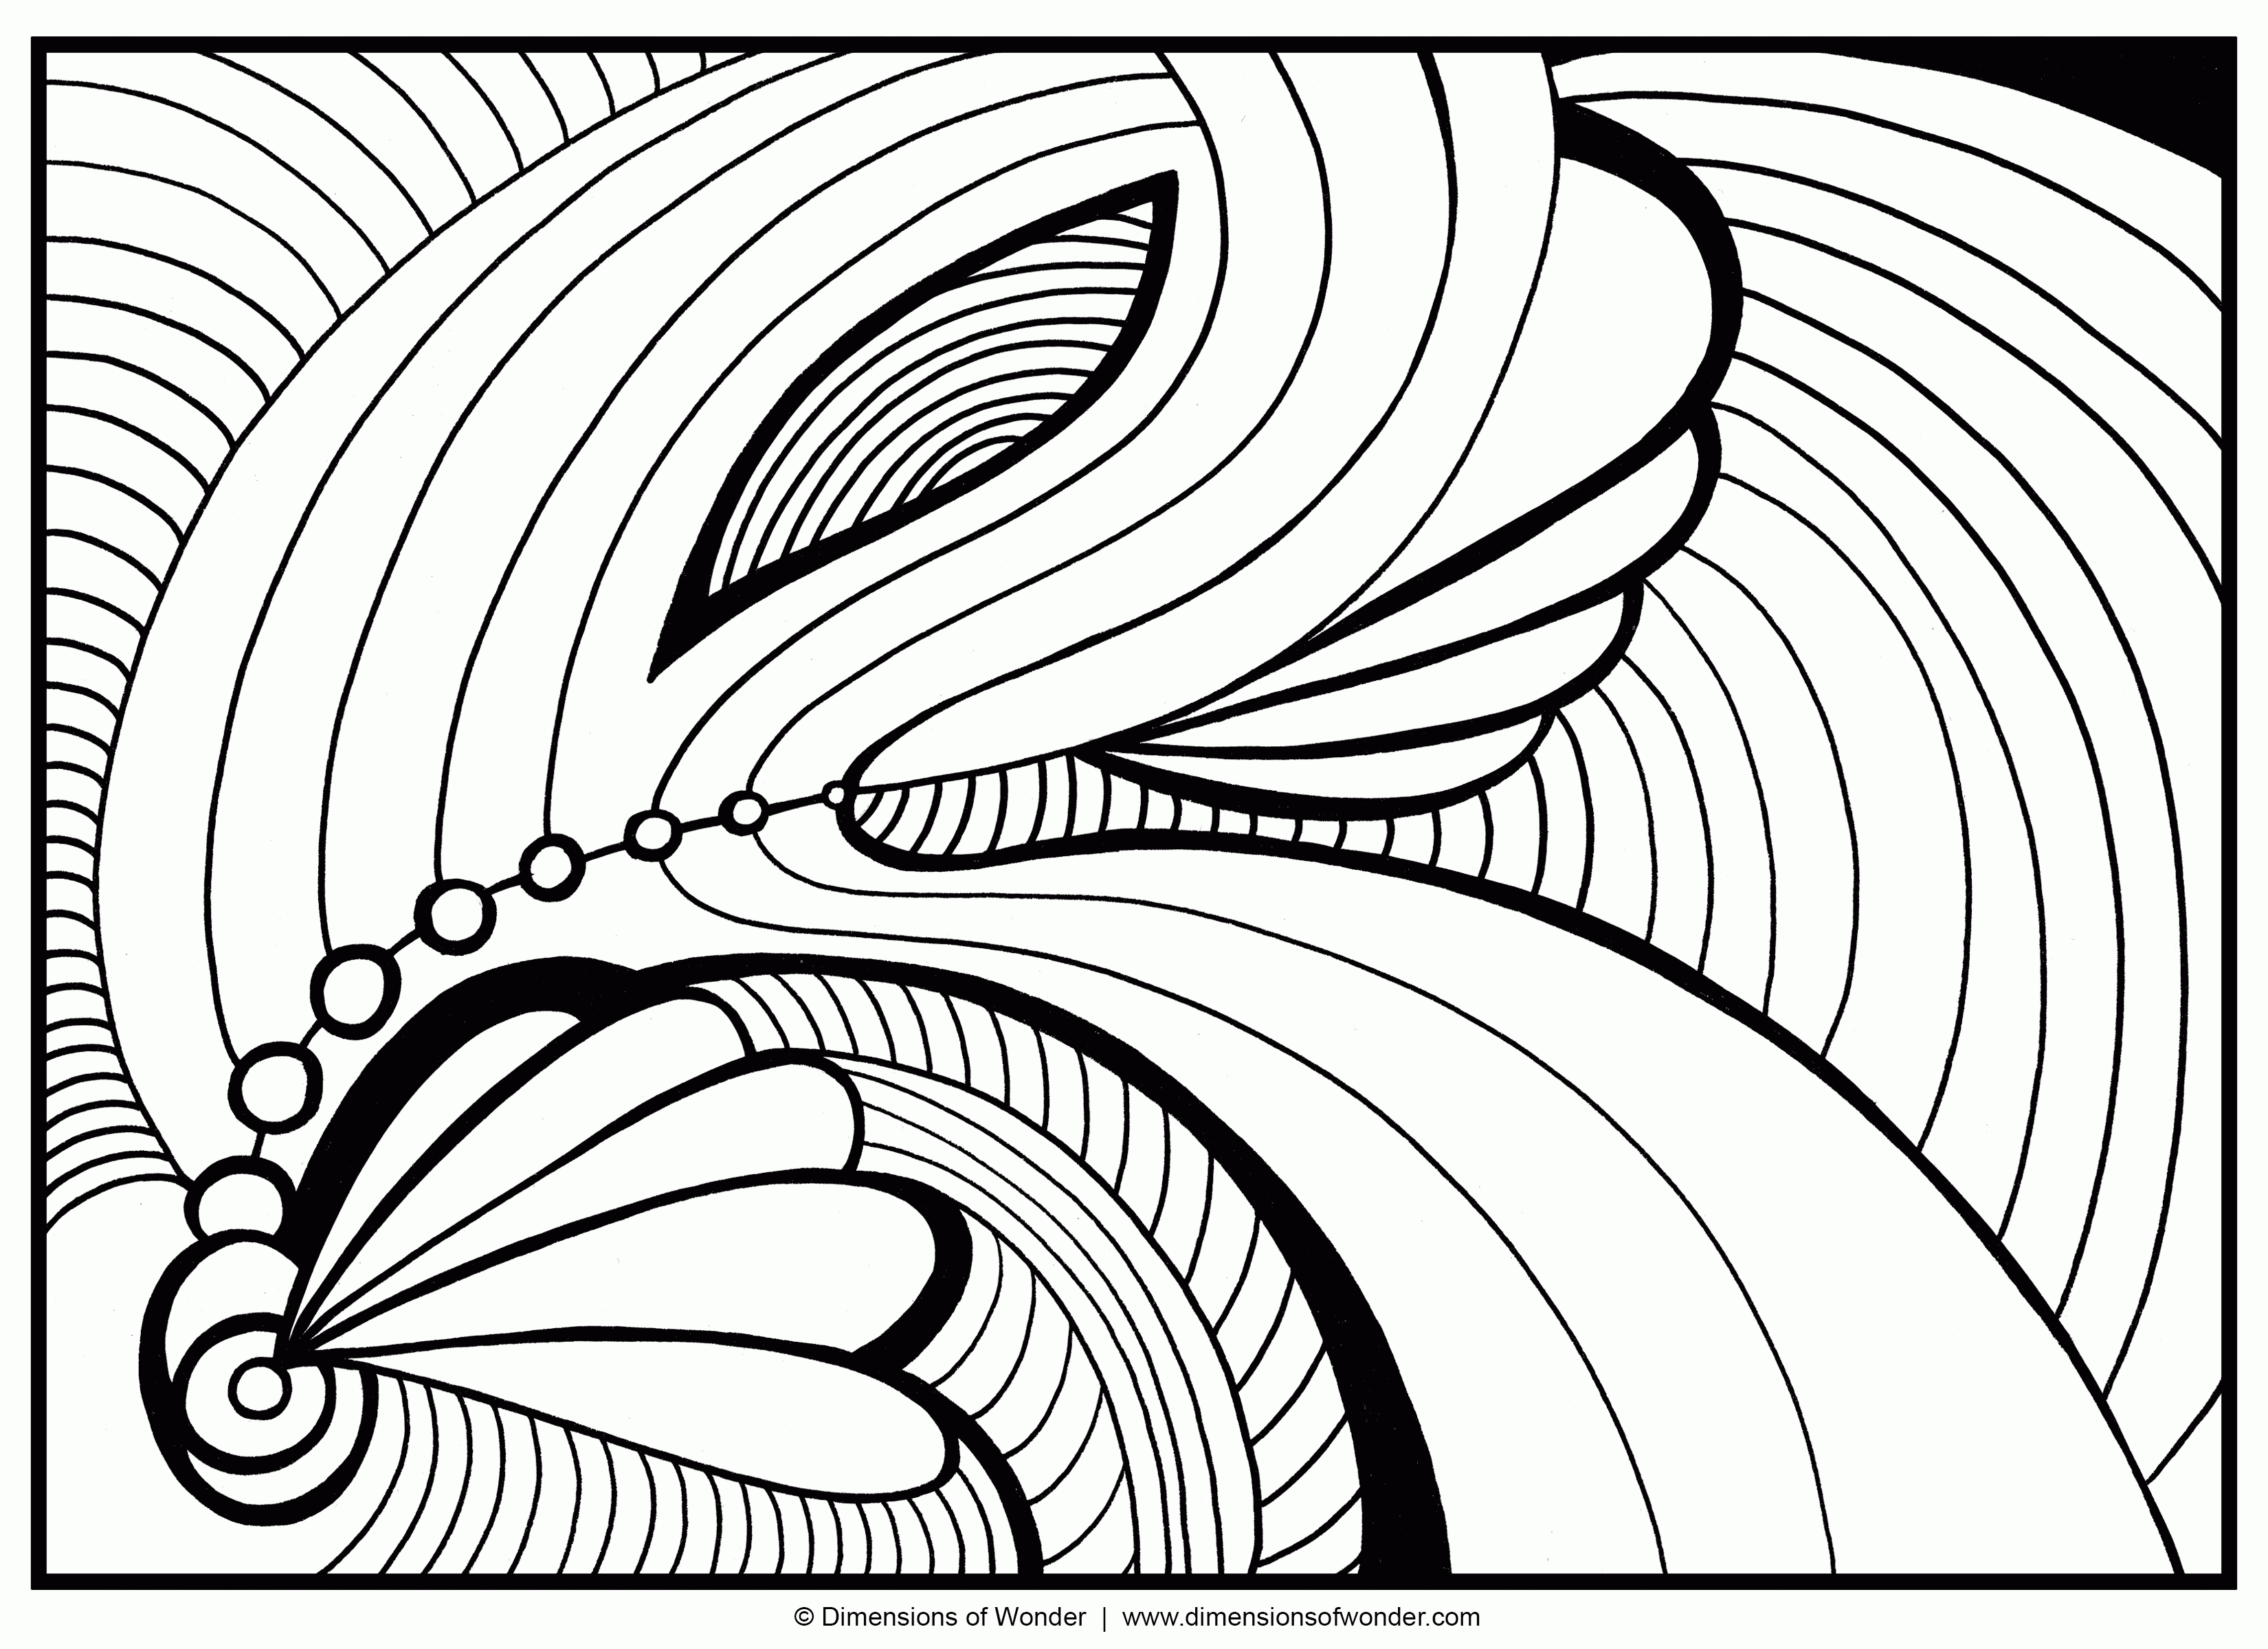 abstract art coloring pages abstract doodle coloring page free printable coloring pages art abstract coloring pages 